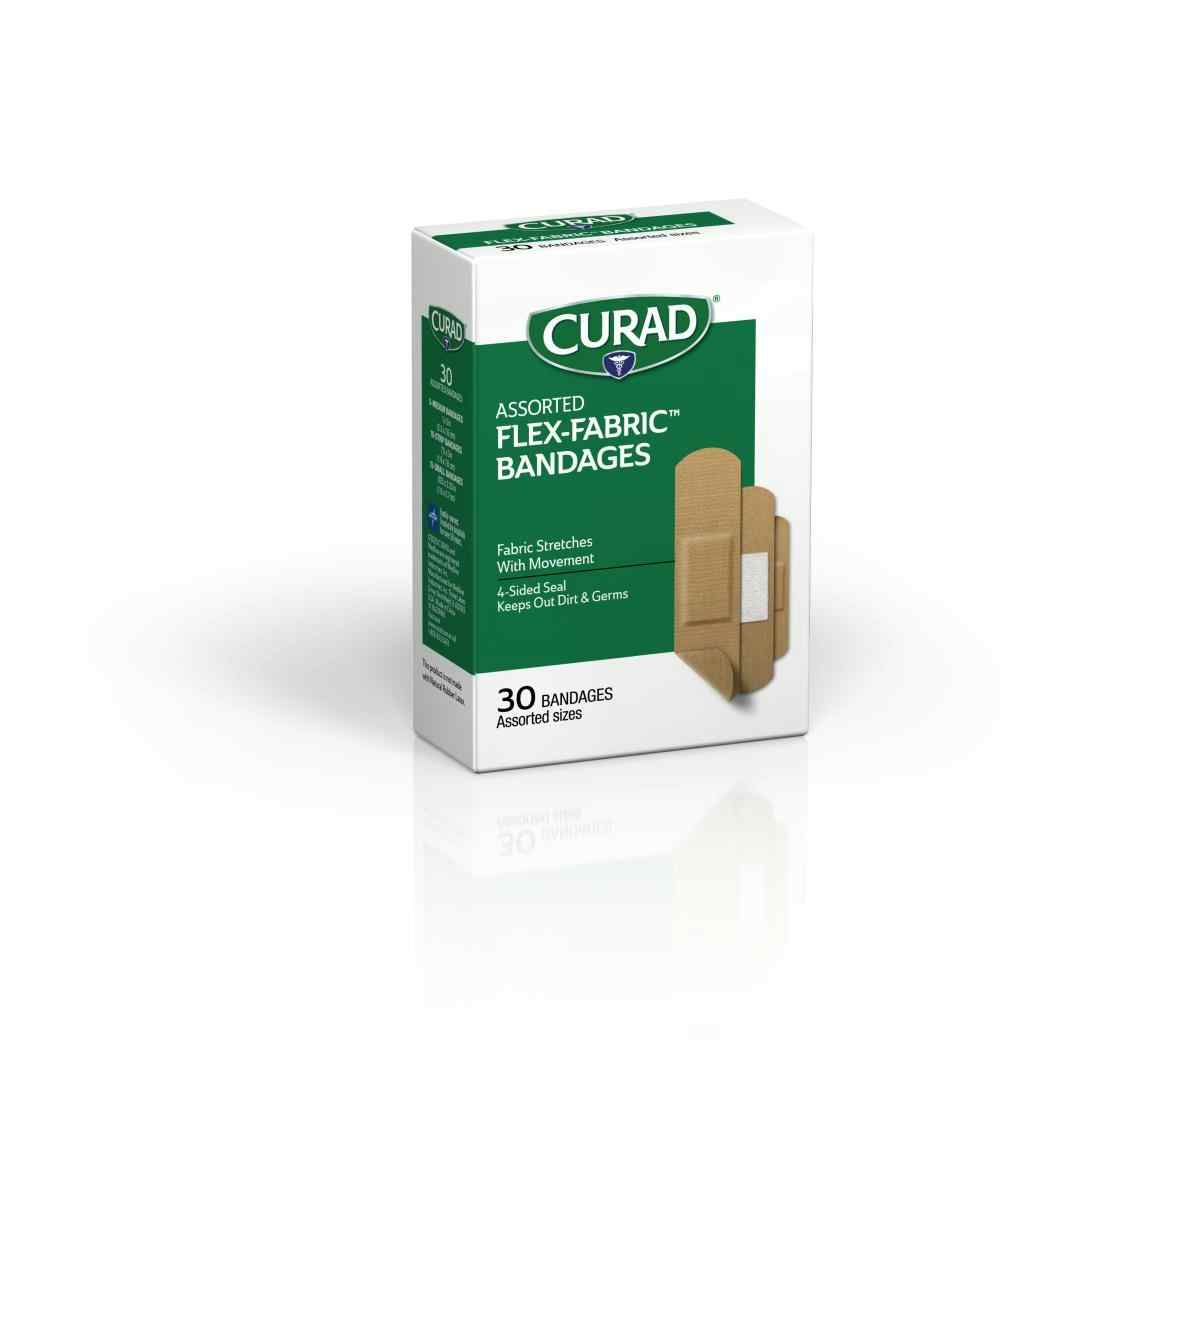 Curad Flex-Fabric Bandages, Assorted Sizes, CUR47314RBH, Box of 30